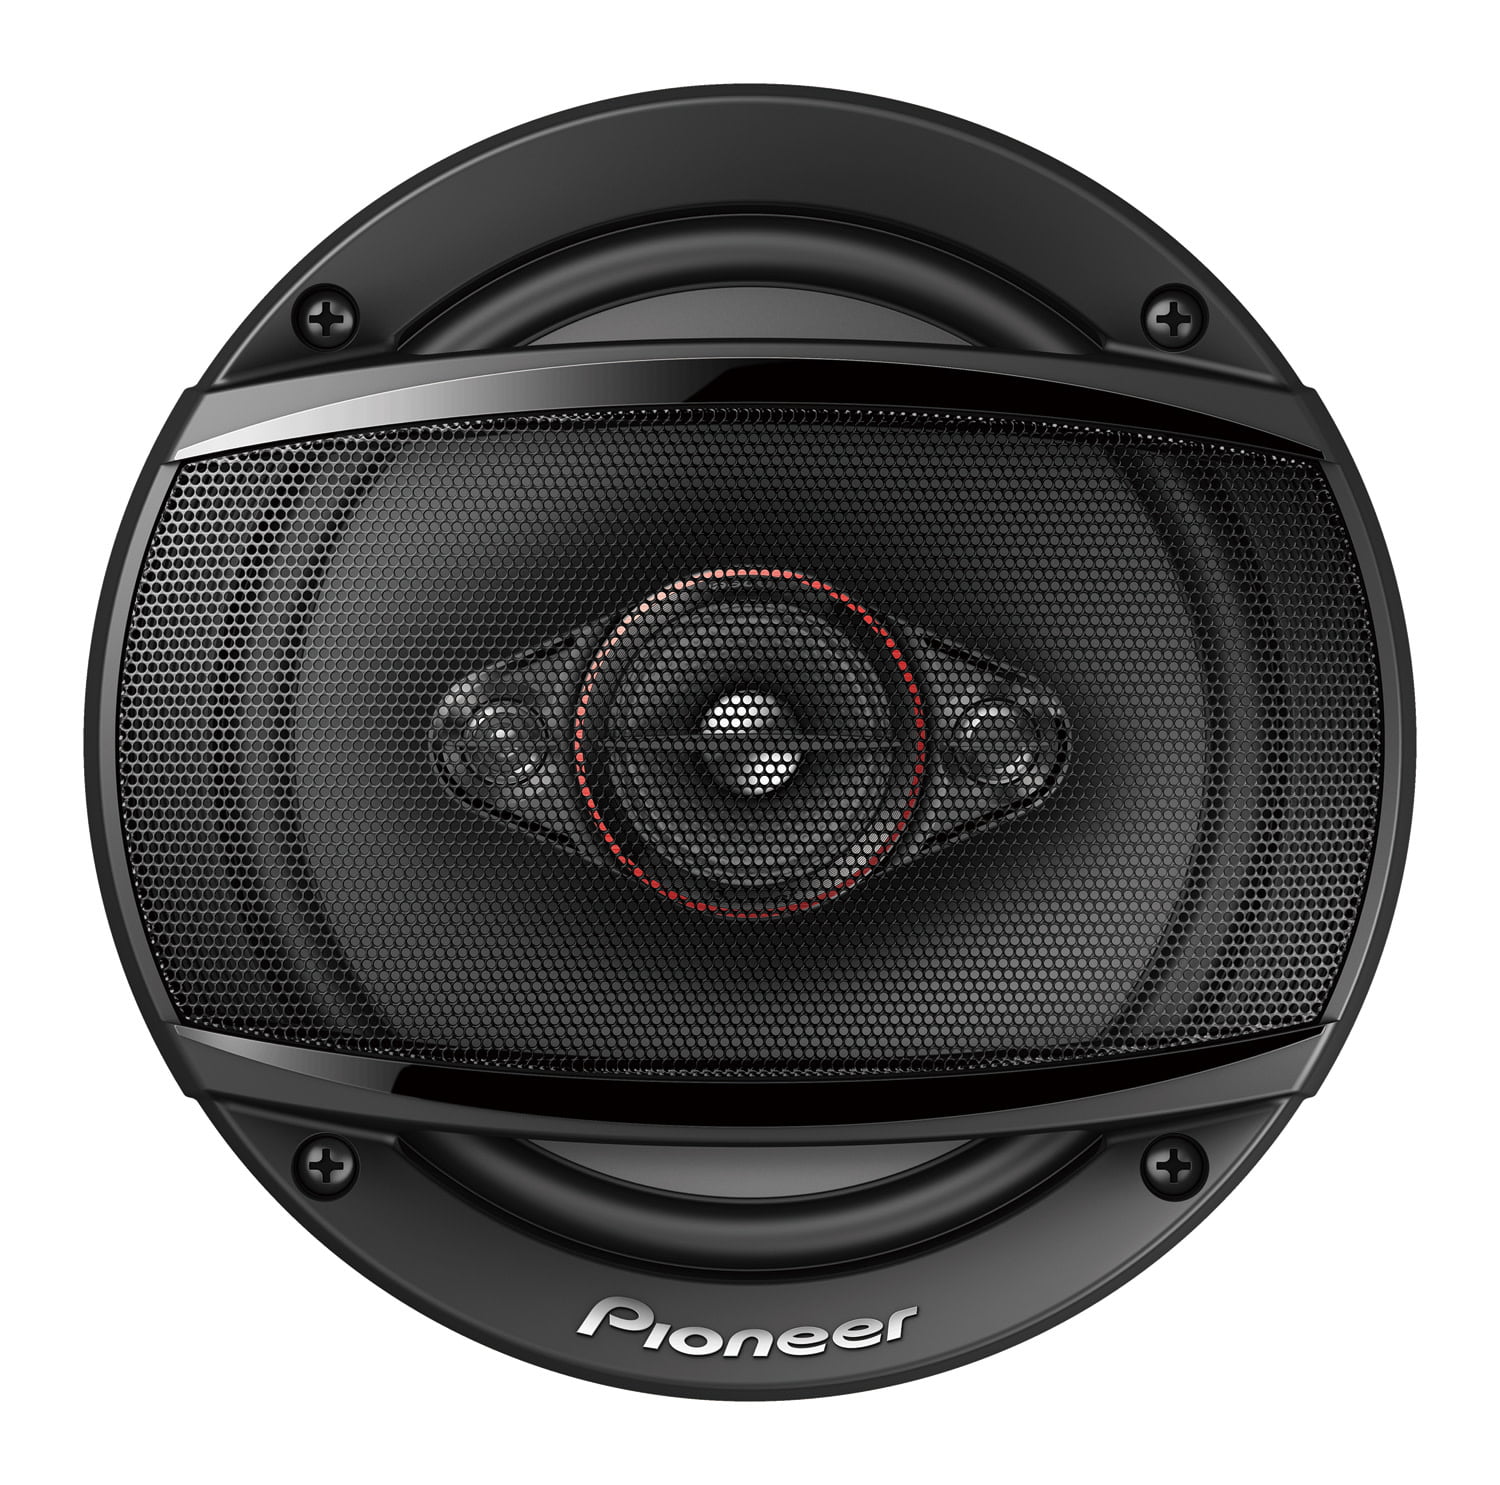 4 x BRAND NEW PIONEER 6.5-INCH 6-1/2" CAR AUDIO 2-WAY COAXIAL SPEAKERS 600W MAX 